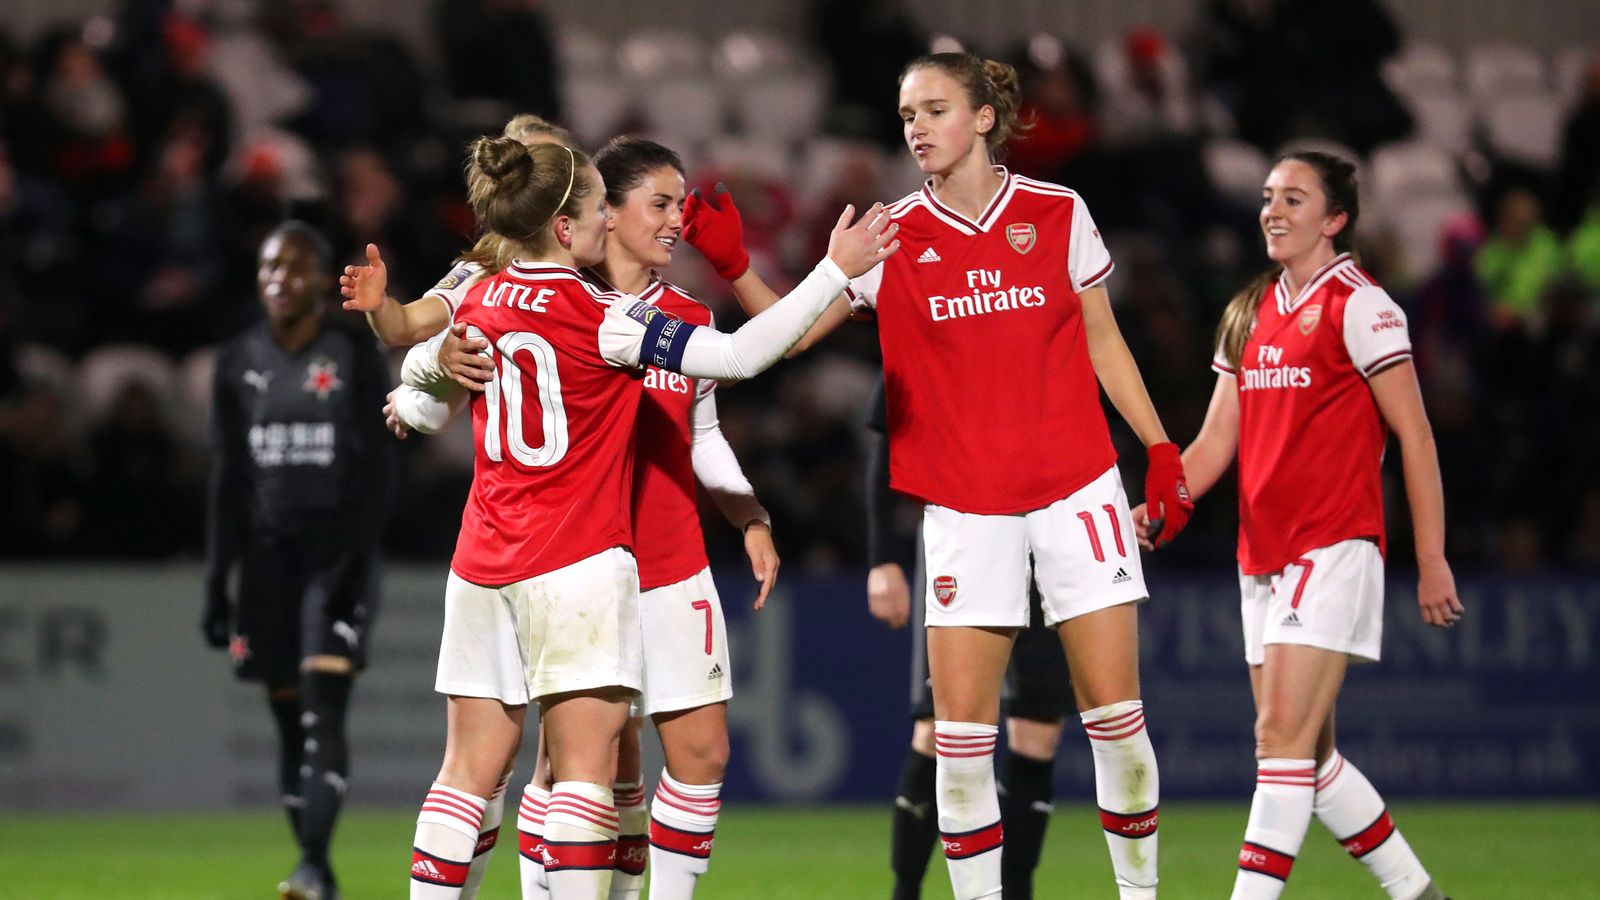 Arsenal to play PSG in Women's Champions League quarterfinals